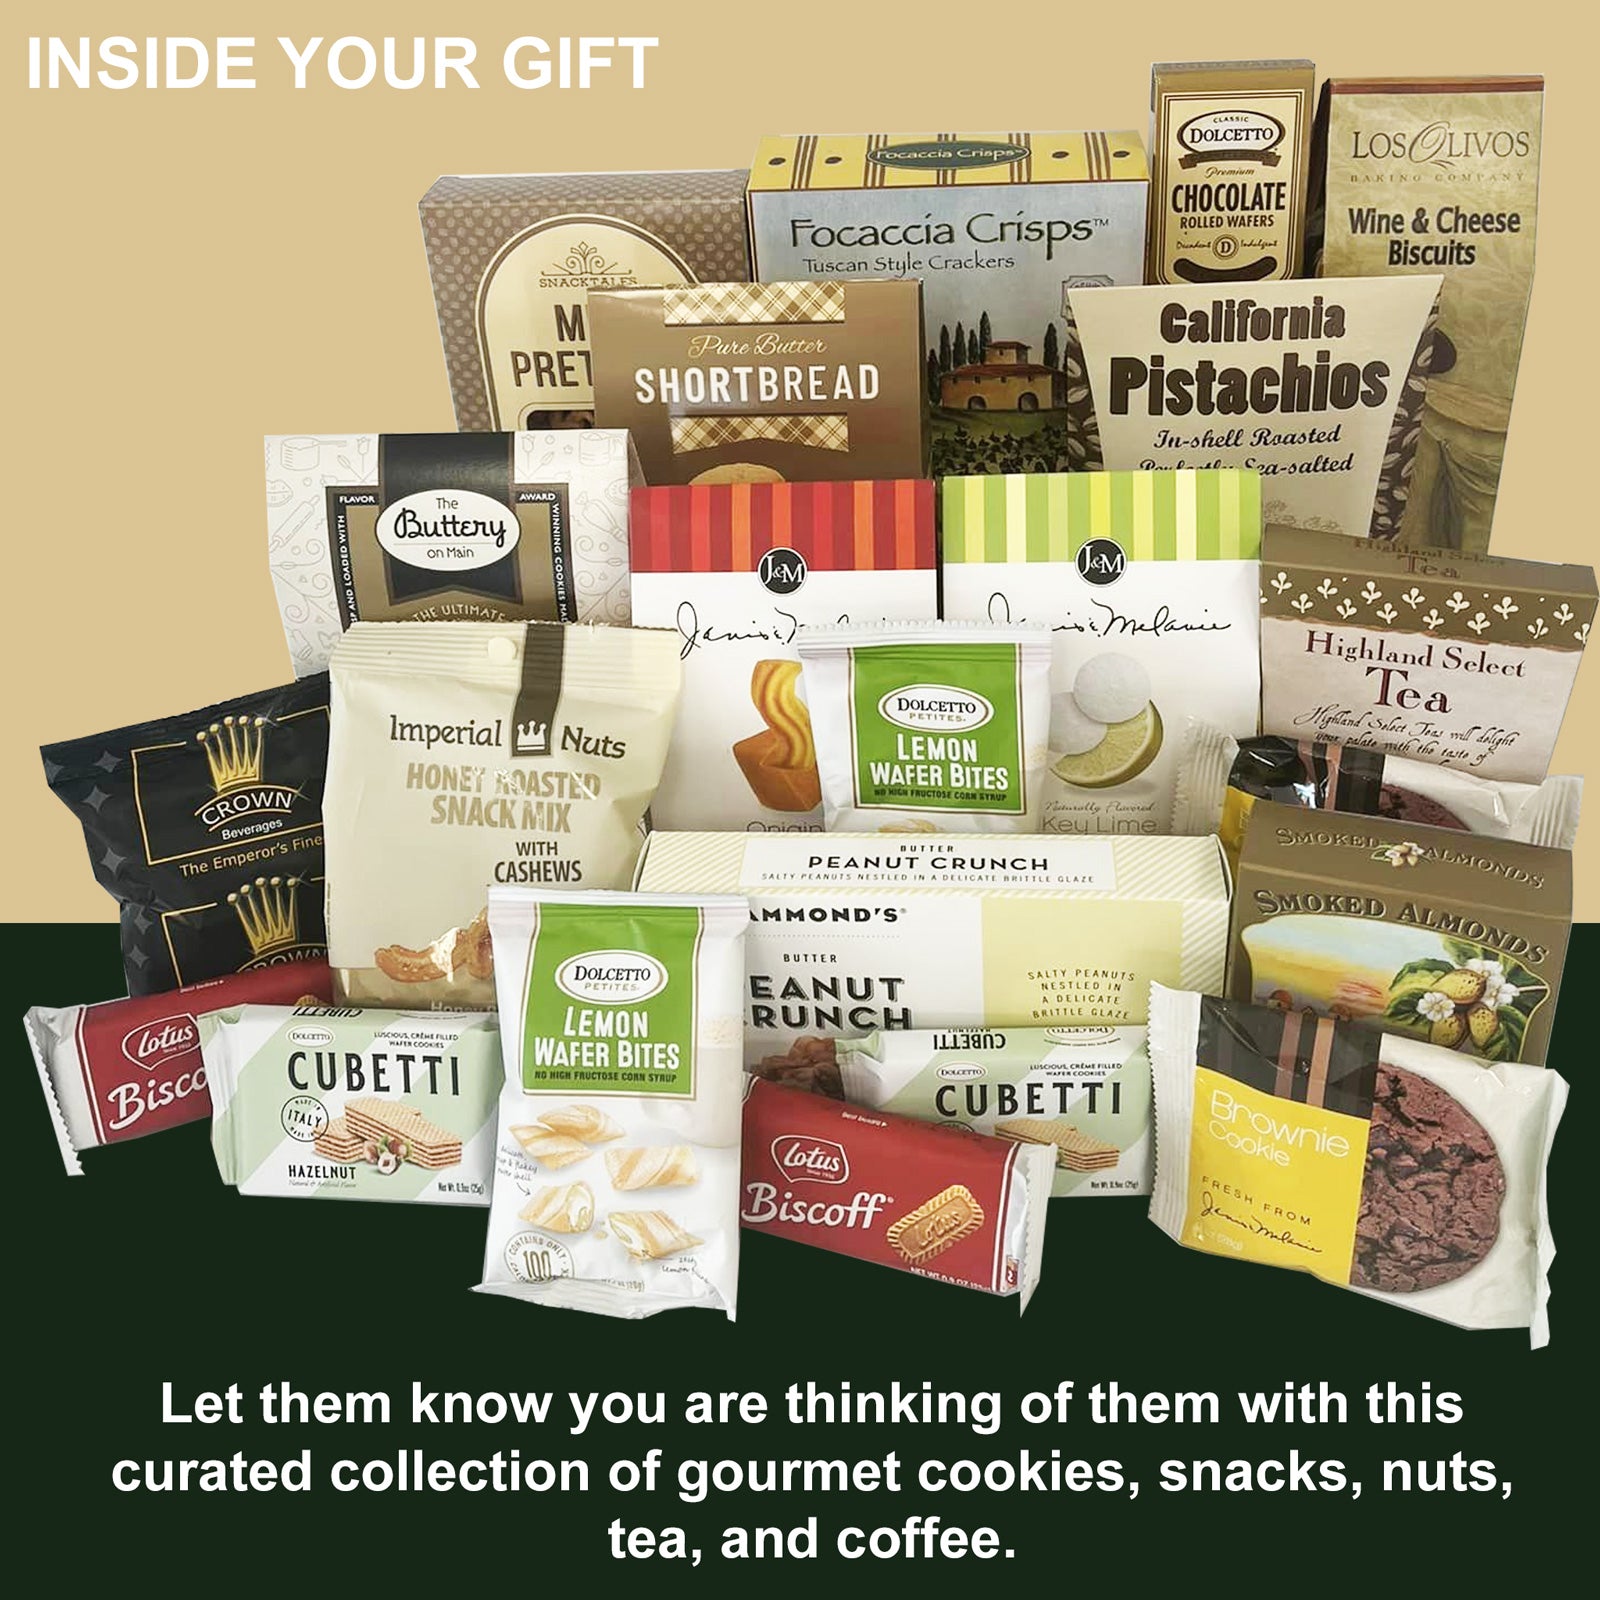 Grand Gourmet Gift Basket for Thinking of You, Get Well, Just Because Gift Basket for Men, Women, Friends and Family